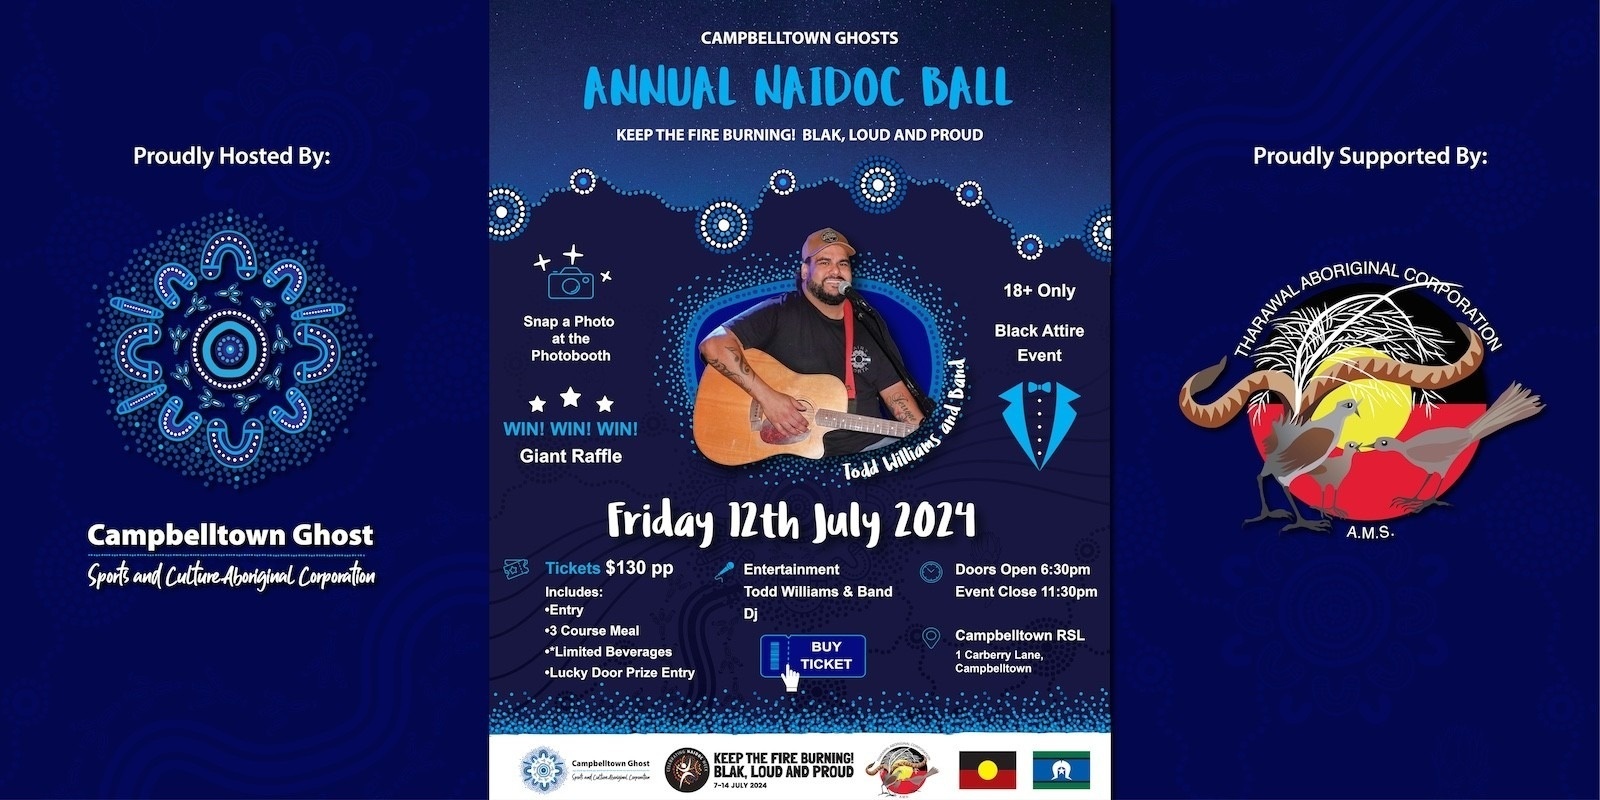 Banner image for CAMPBELLTOWN GHOSTS - ANNUAL NAIDOC BALL